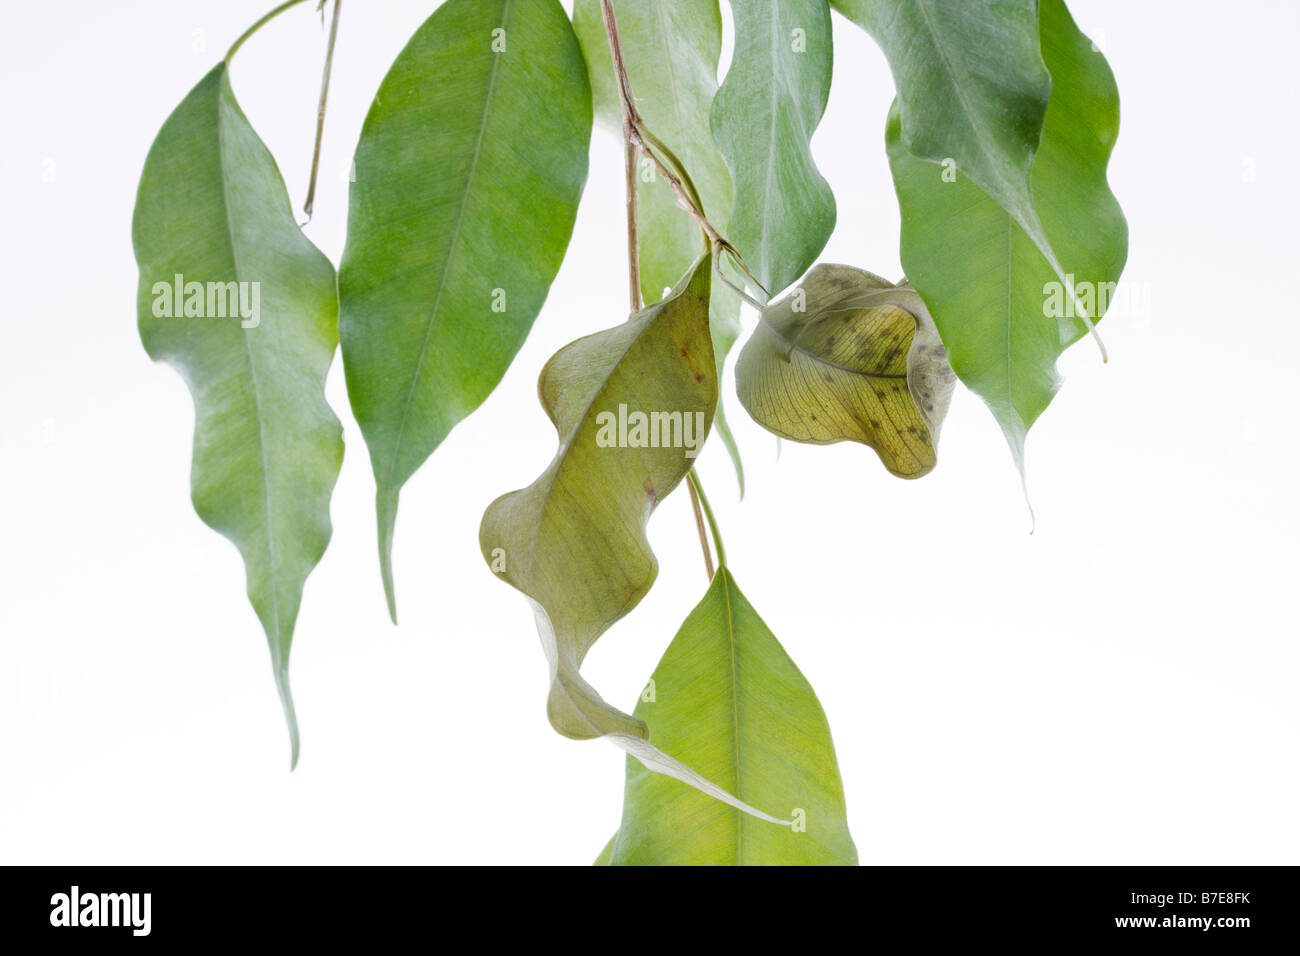 clip image drying leaves of potted fig tree Ficus benjaminii symbolism of green thumb or green fingers Stock Photo